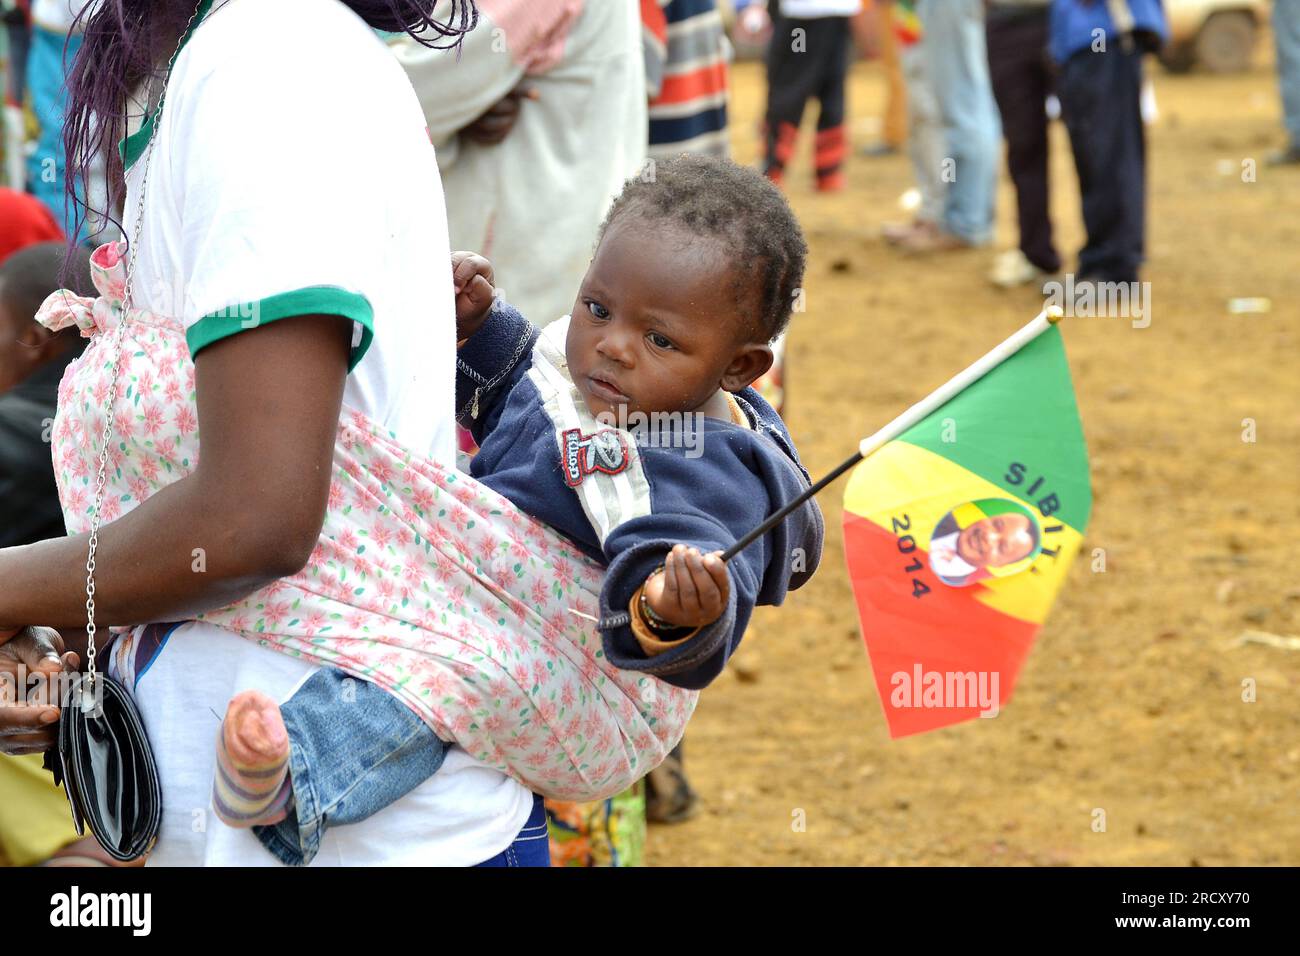 A baby carried on his back by his mother in Sibiti (located between Brazzaville and Pointe-Noire), during an official ceremony, 13 August 2014 Stock Photo